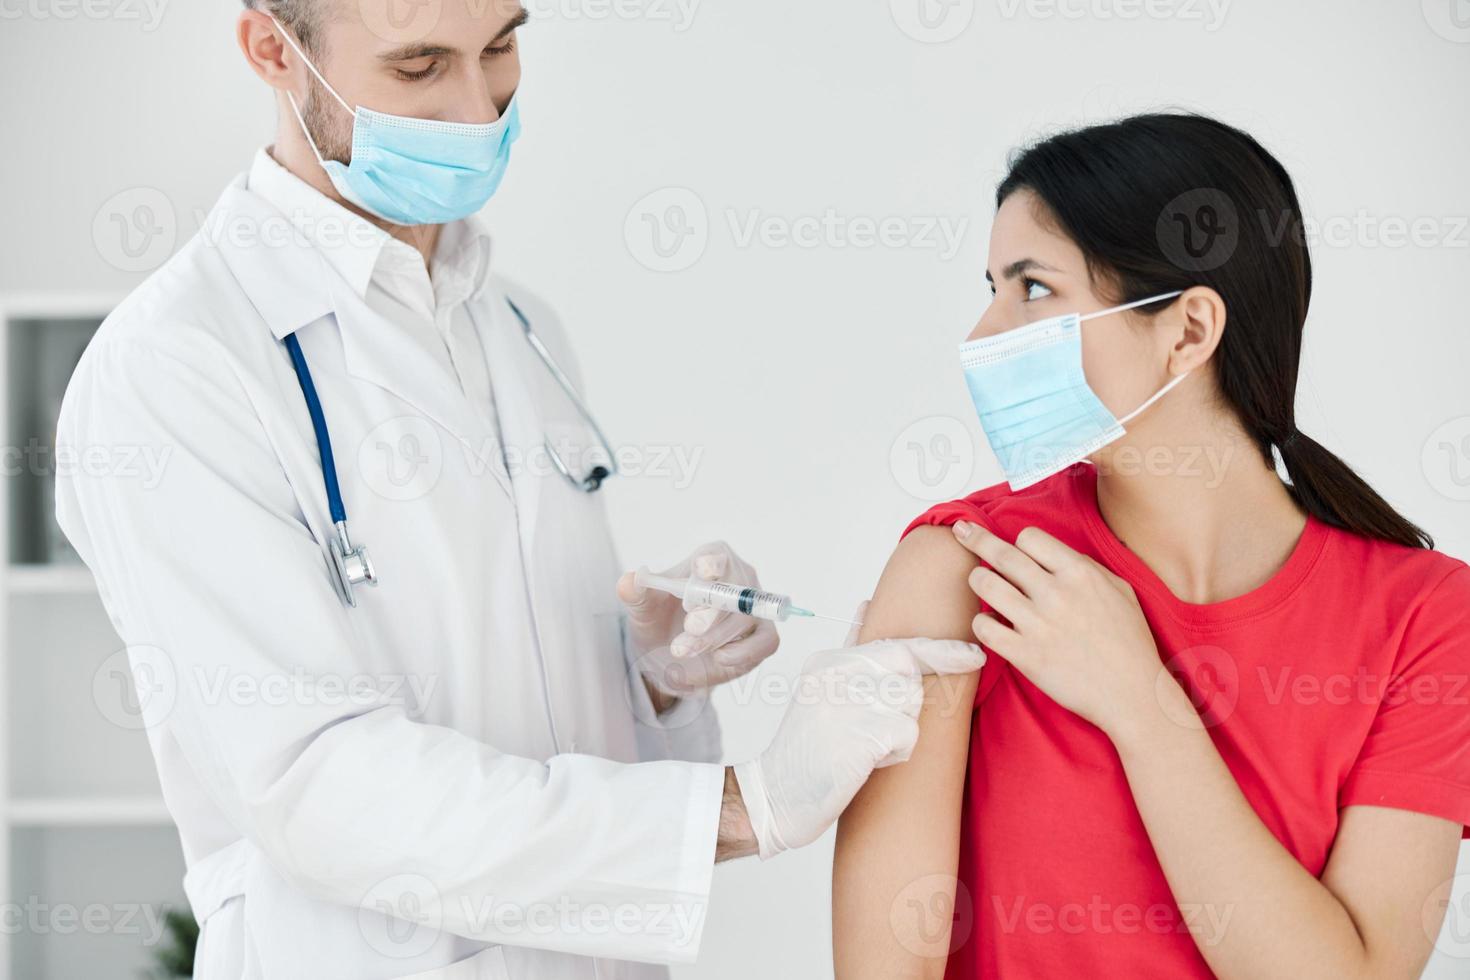 the doctor makes an injection into the patient's arm with a medical mask plan covid photo